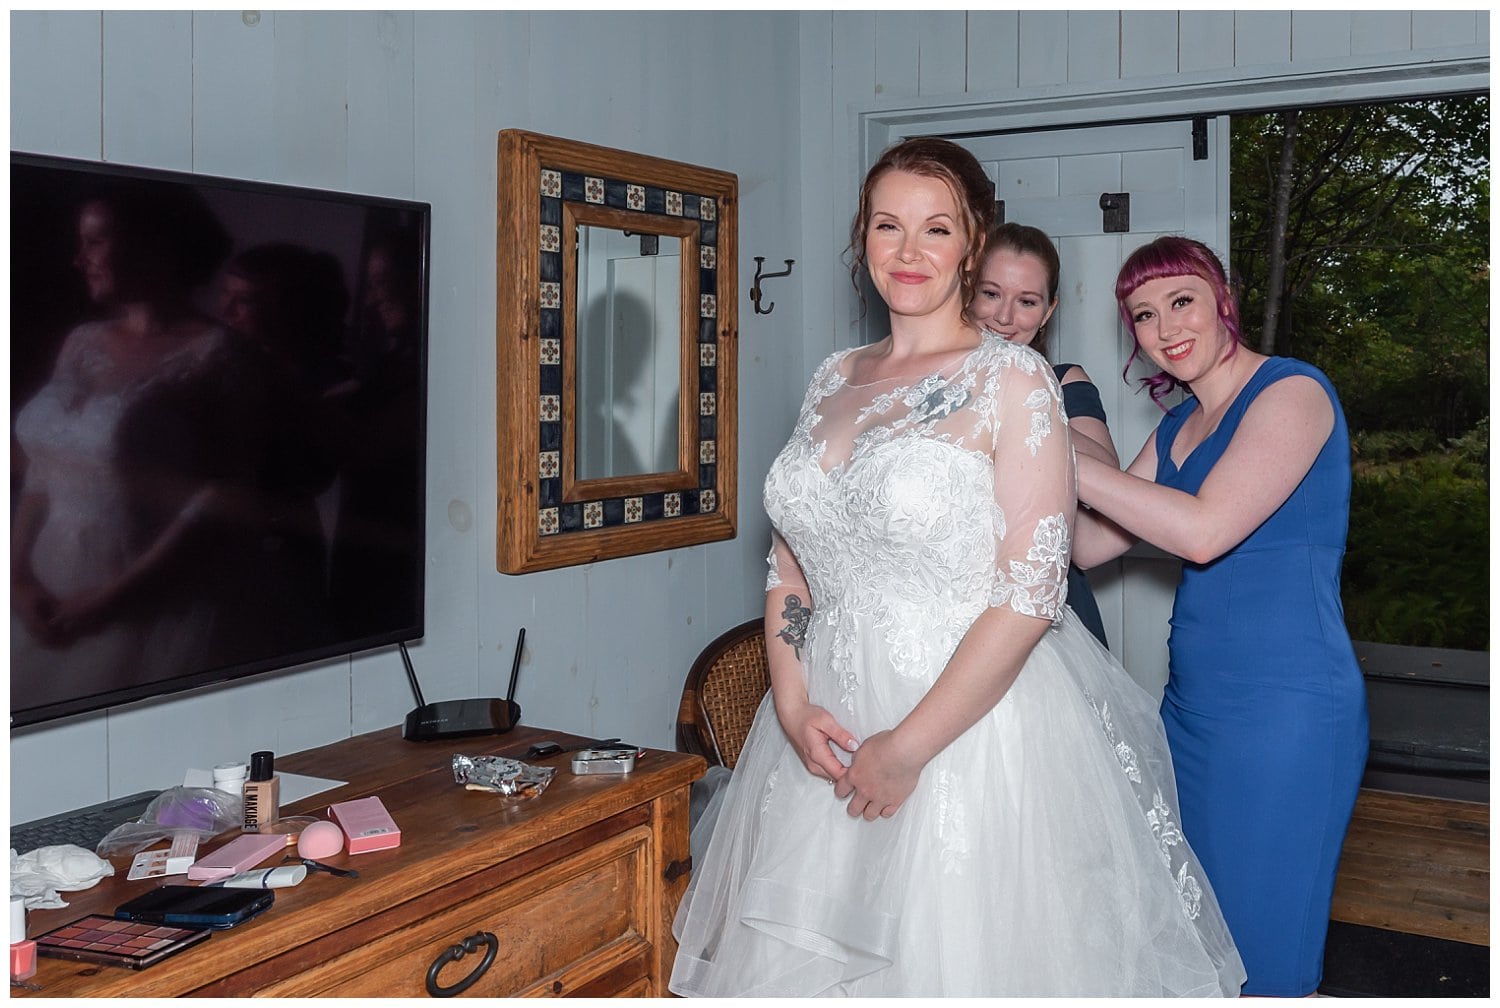 The bridesmaids help the bride into her wedding gown during bridal prep at an air bnb in Halifax.